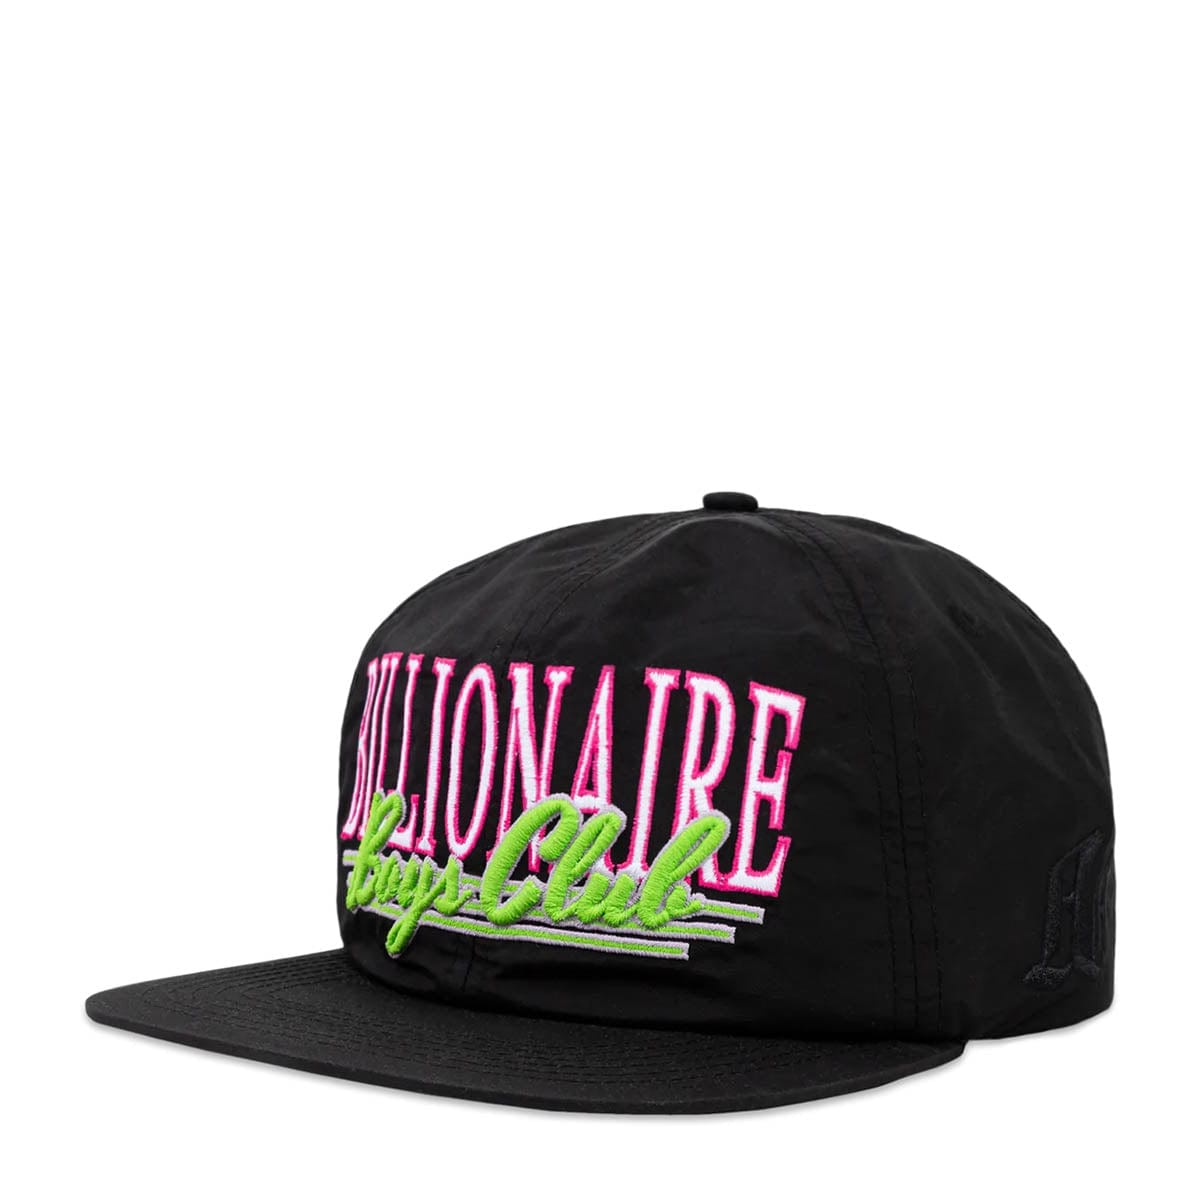 Billionaire Boys Club Accessories - HATS - Snapback-Fitted Hat BLACK / O/S BB WAVE RIDER SNAPBACK